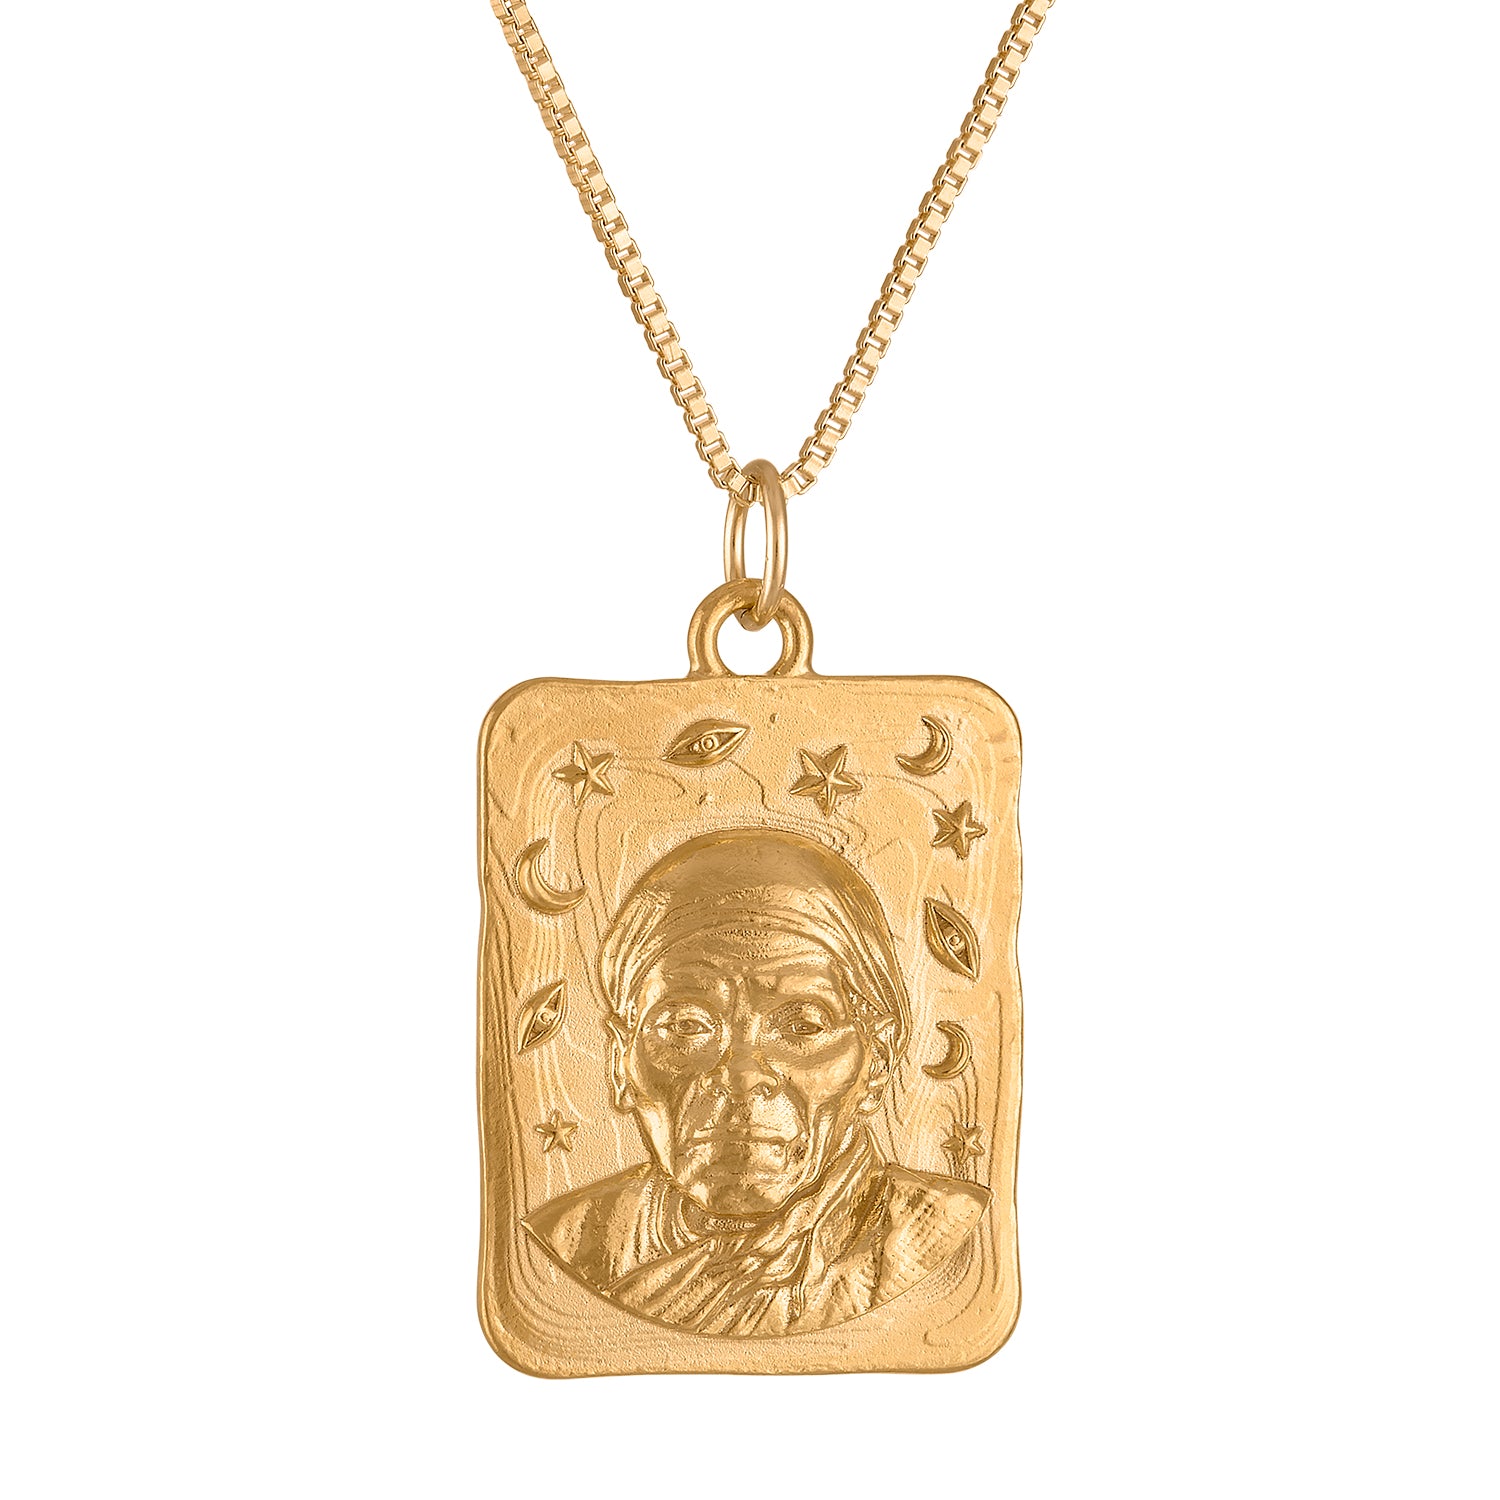 Harriet Tubman Small Square Medallion Necklace